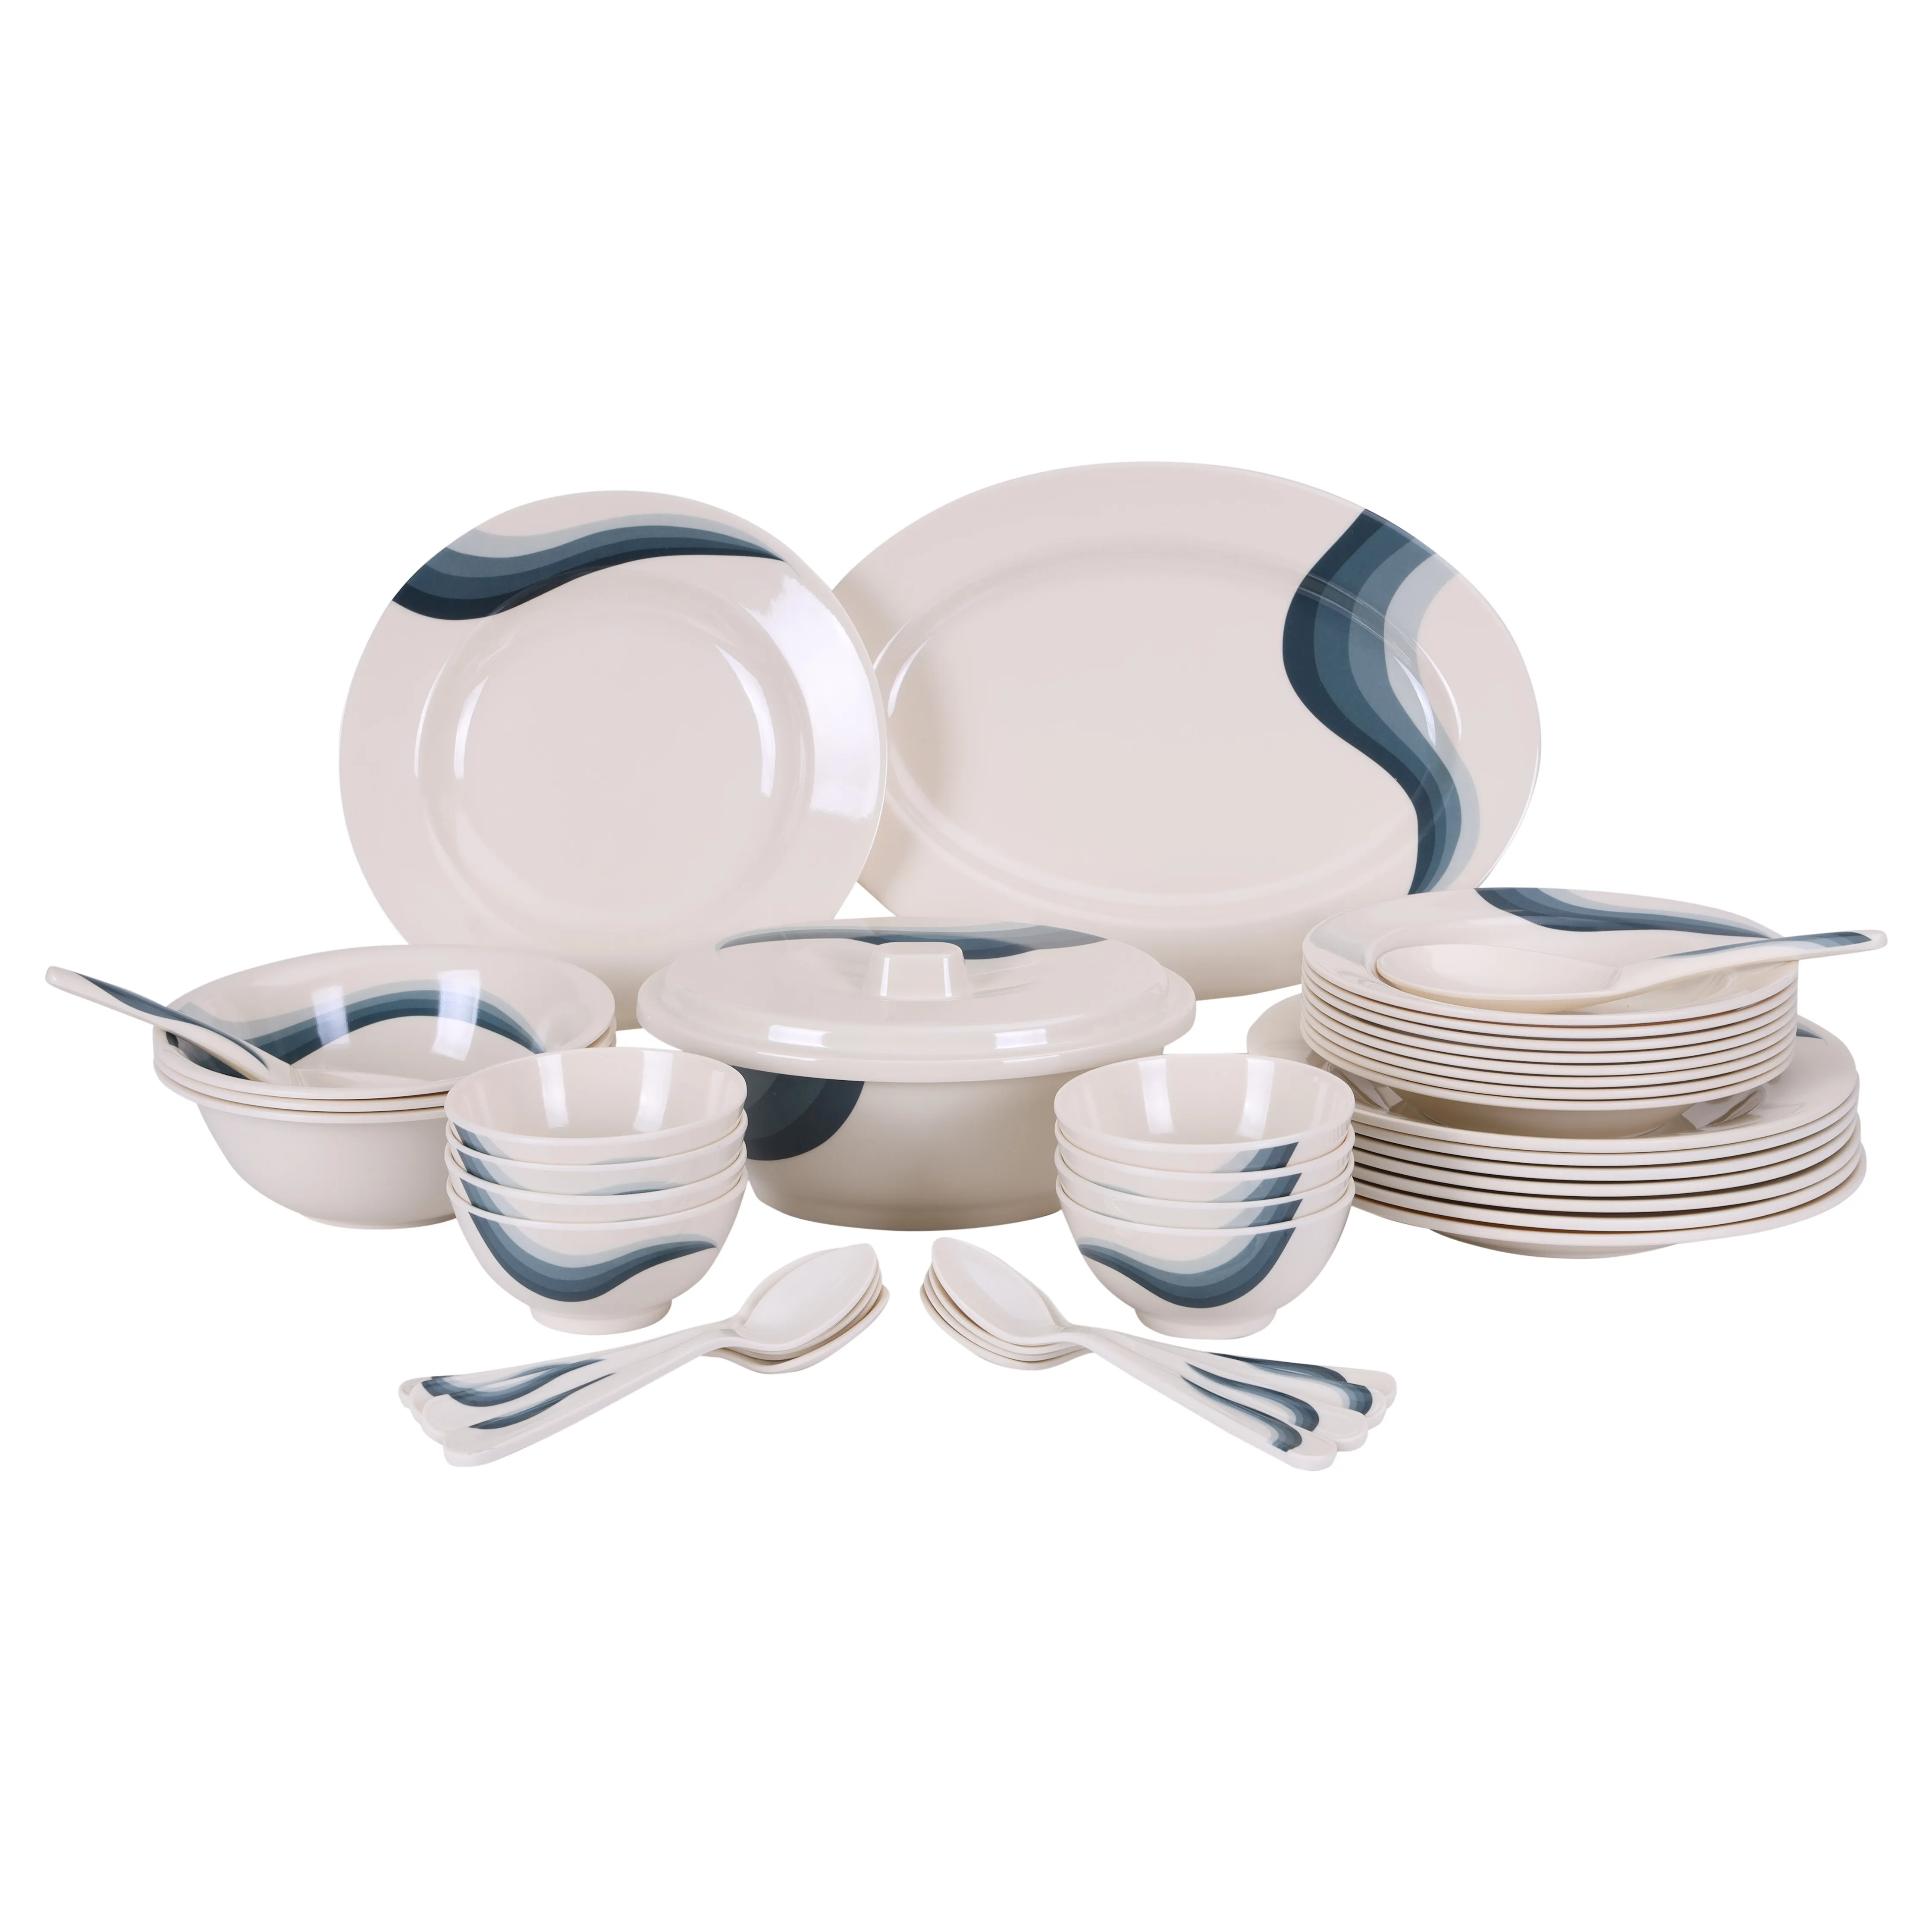 Royalford  RF6721 Melamine Ware Dinner Set, 40 Pcs - Durable & Safe |Useful for breakfast, lunch, dinner| Ideal for home, parties, catering, hotels & restaurants